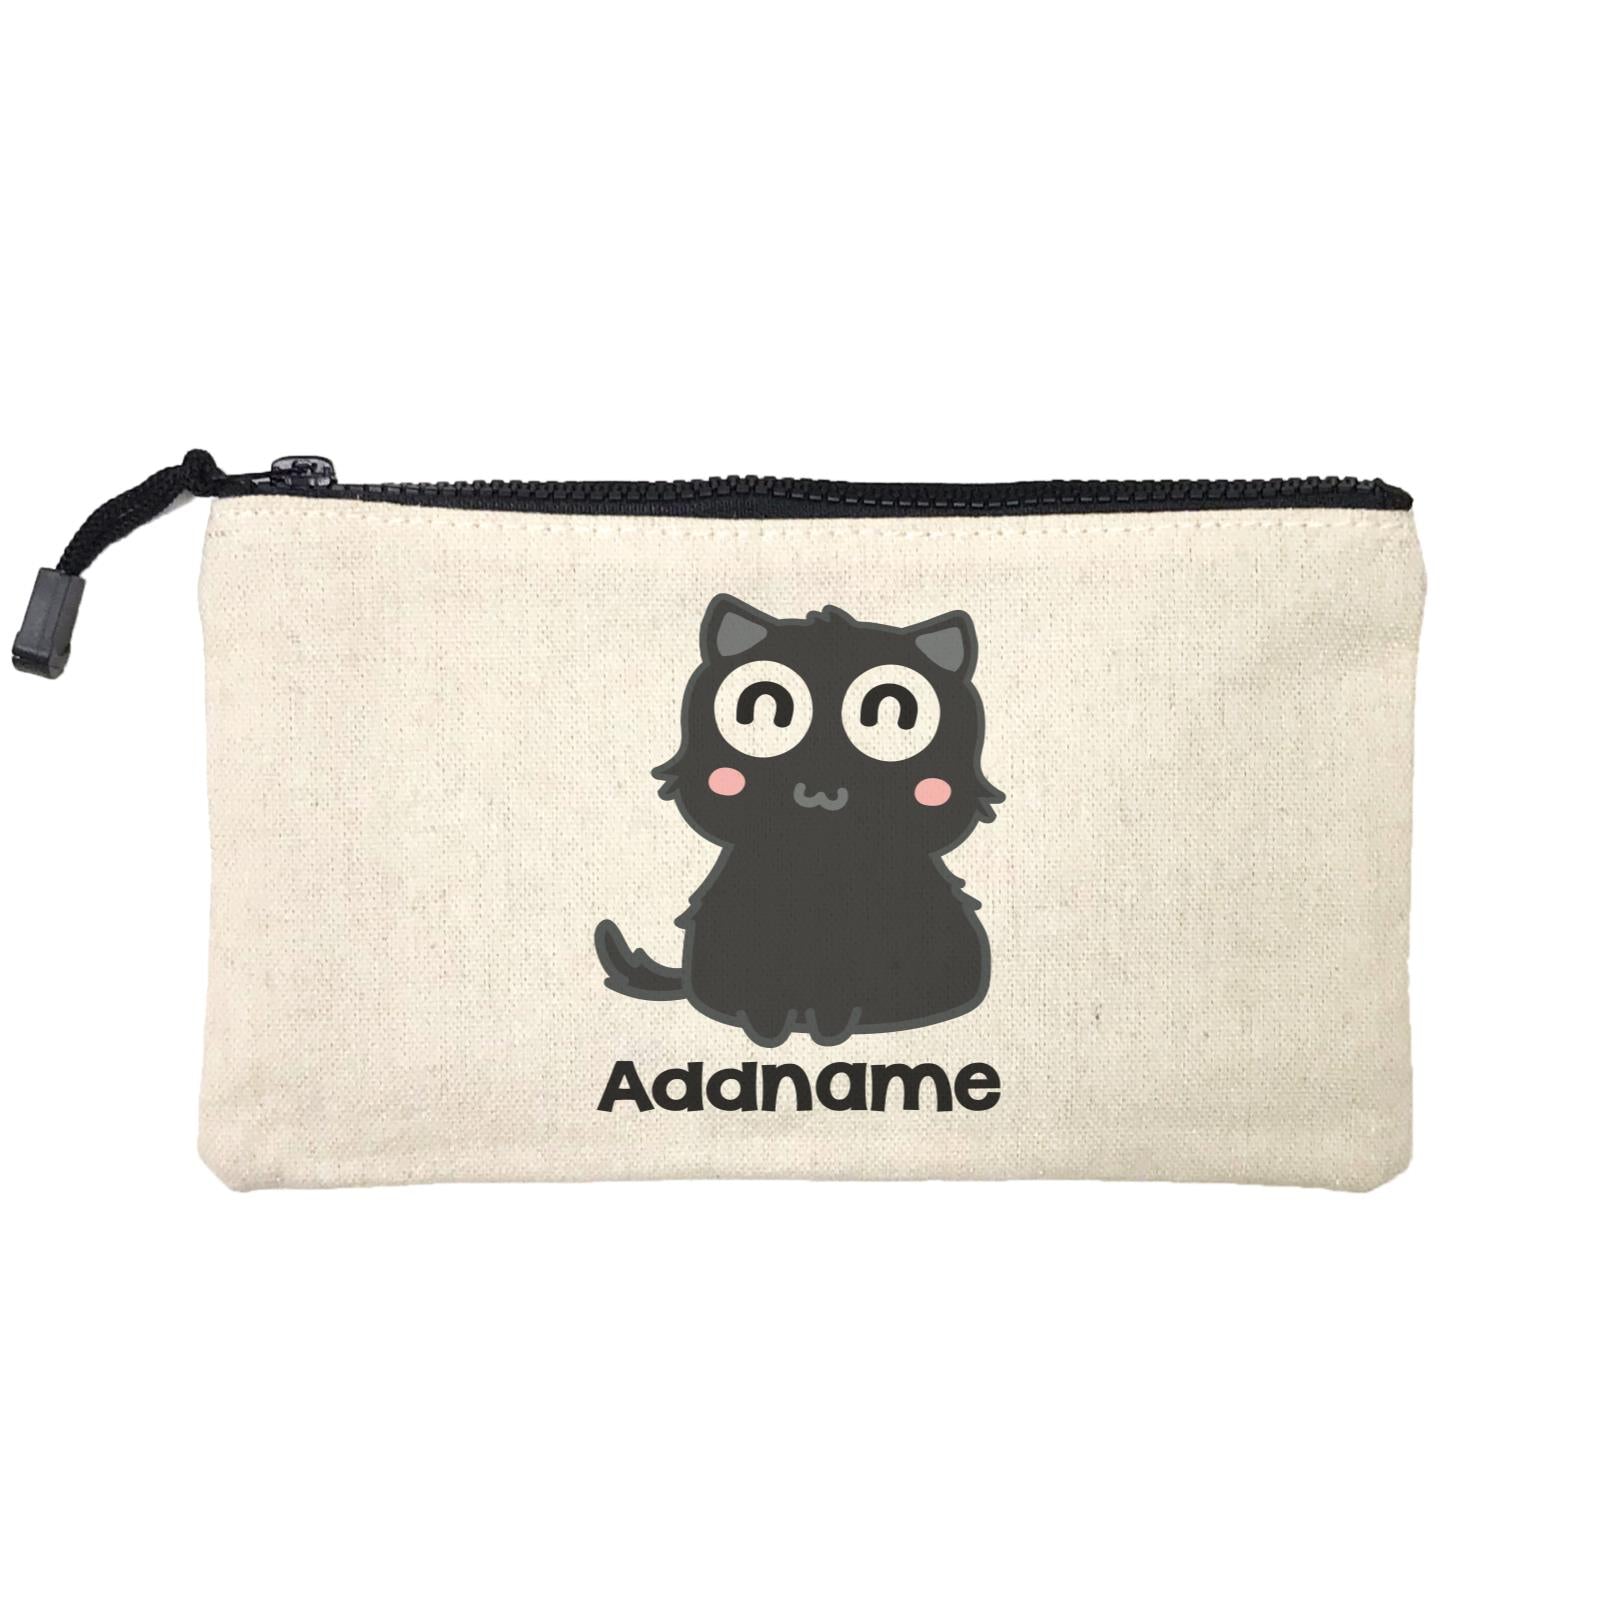 Drawn Adorable Cats Black Addname Mini Accessories Stationery Pouch